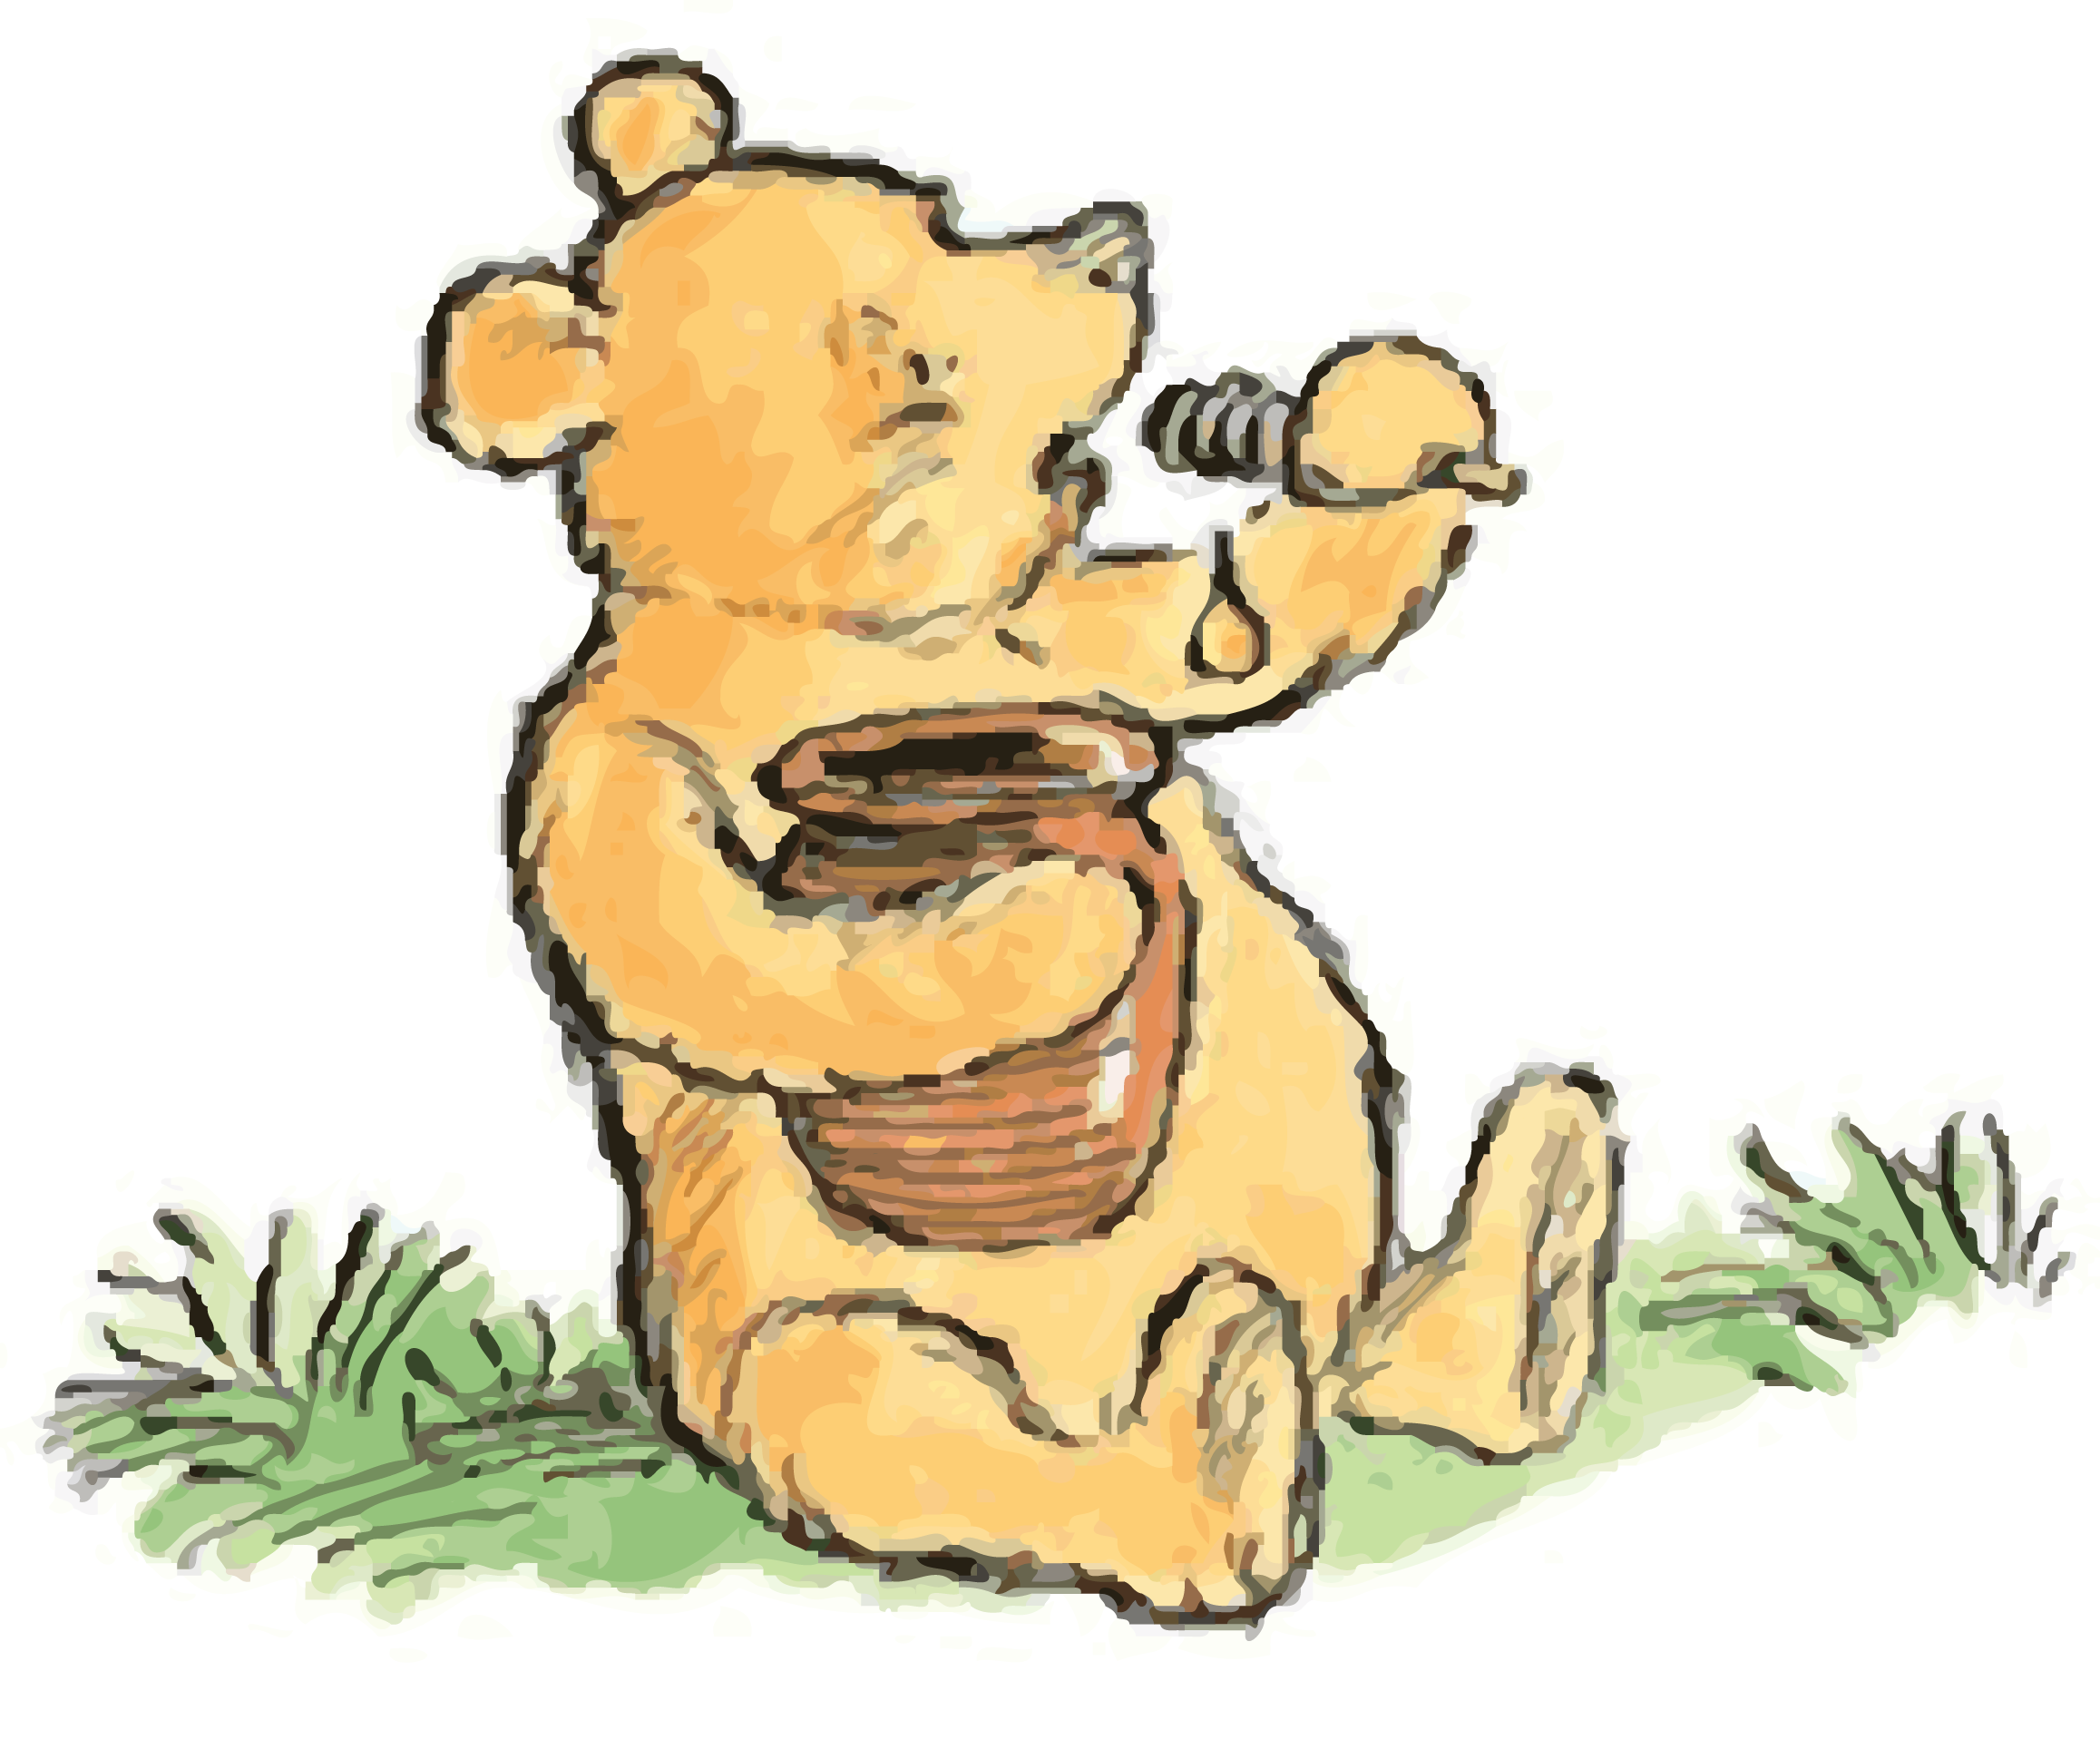 Classic Winnie The Pooh Wallpaper 63 images